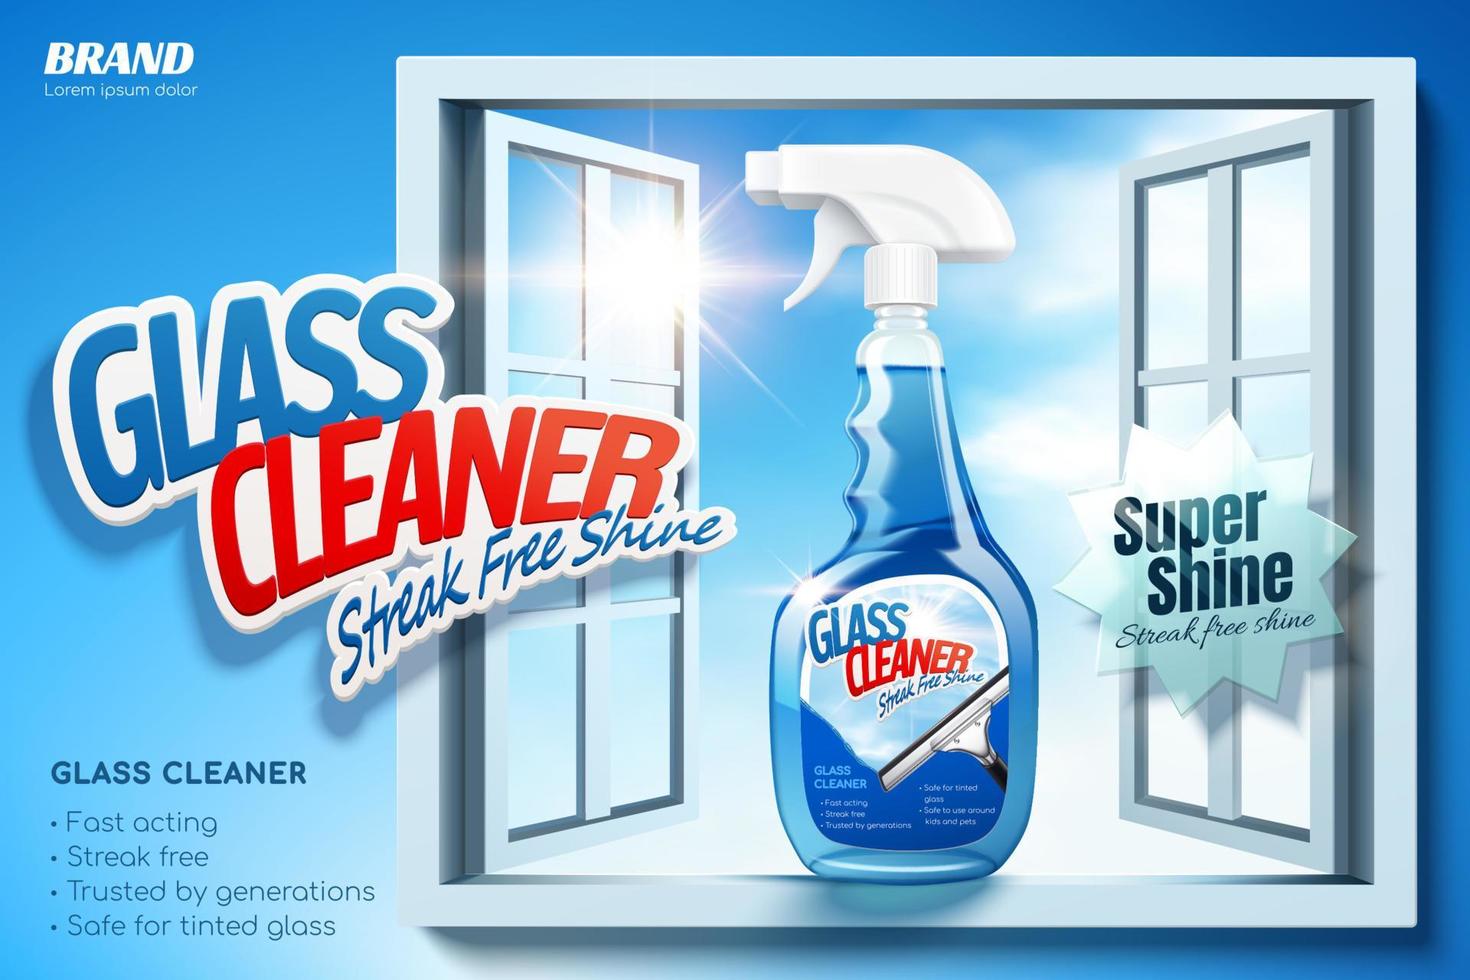 Glass cleaner ad banner in 3D illustration. Spray bottle package in window sill on blue background vector